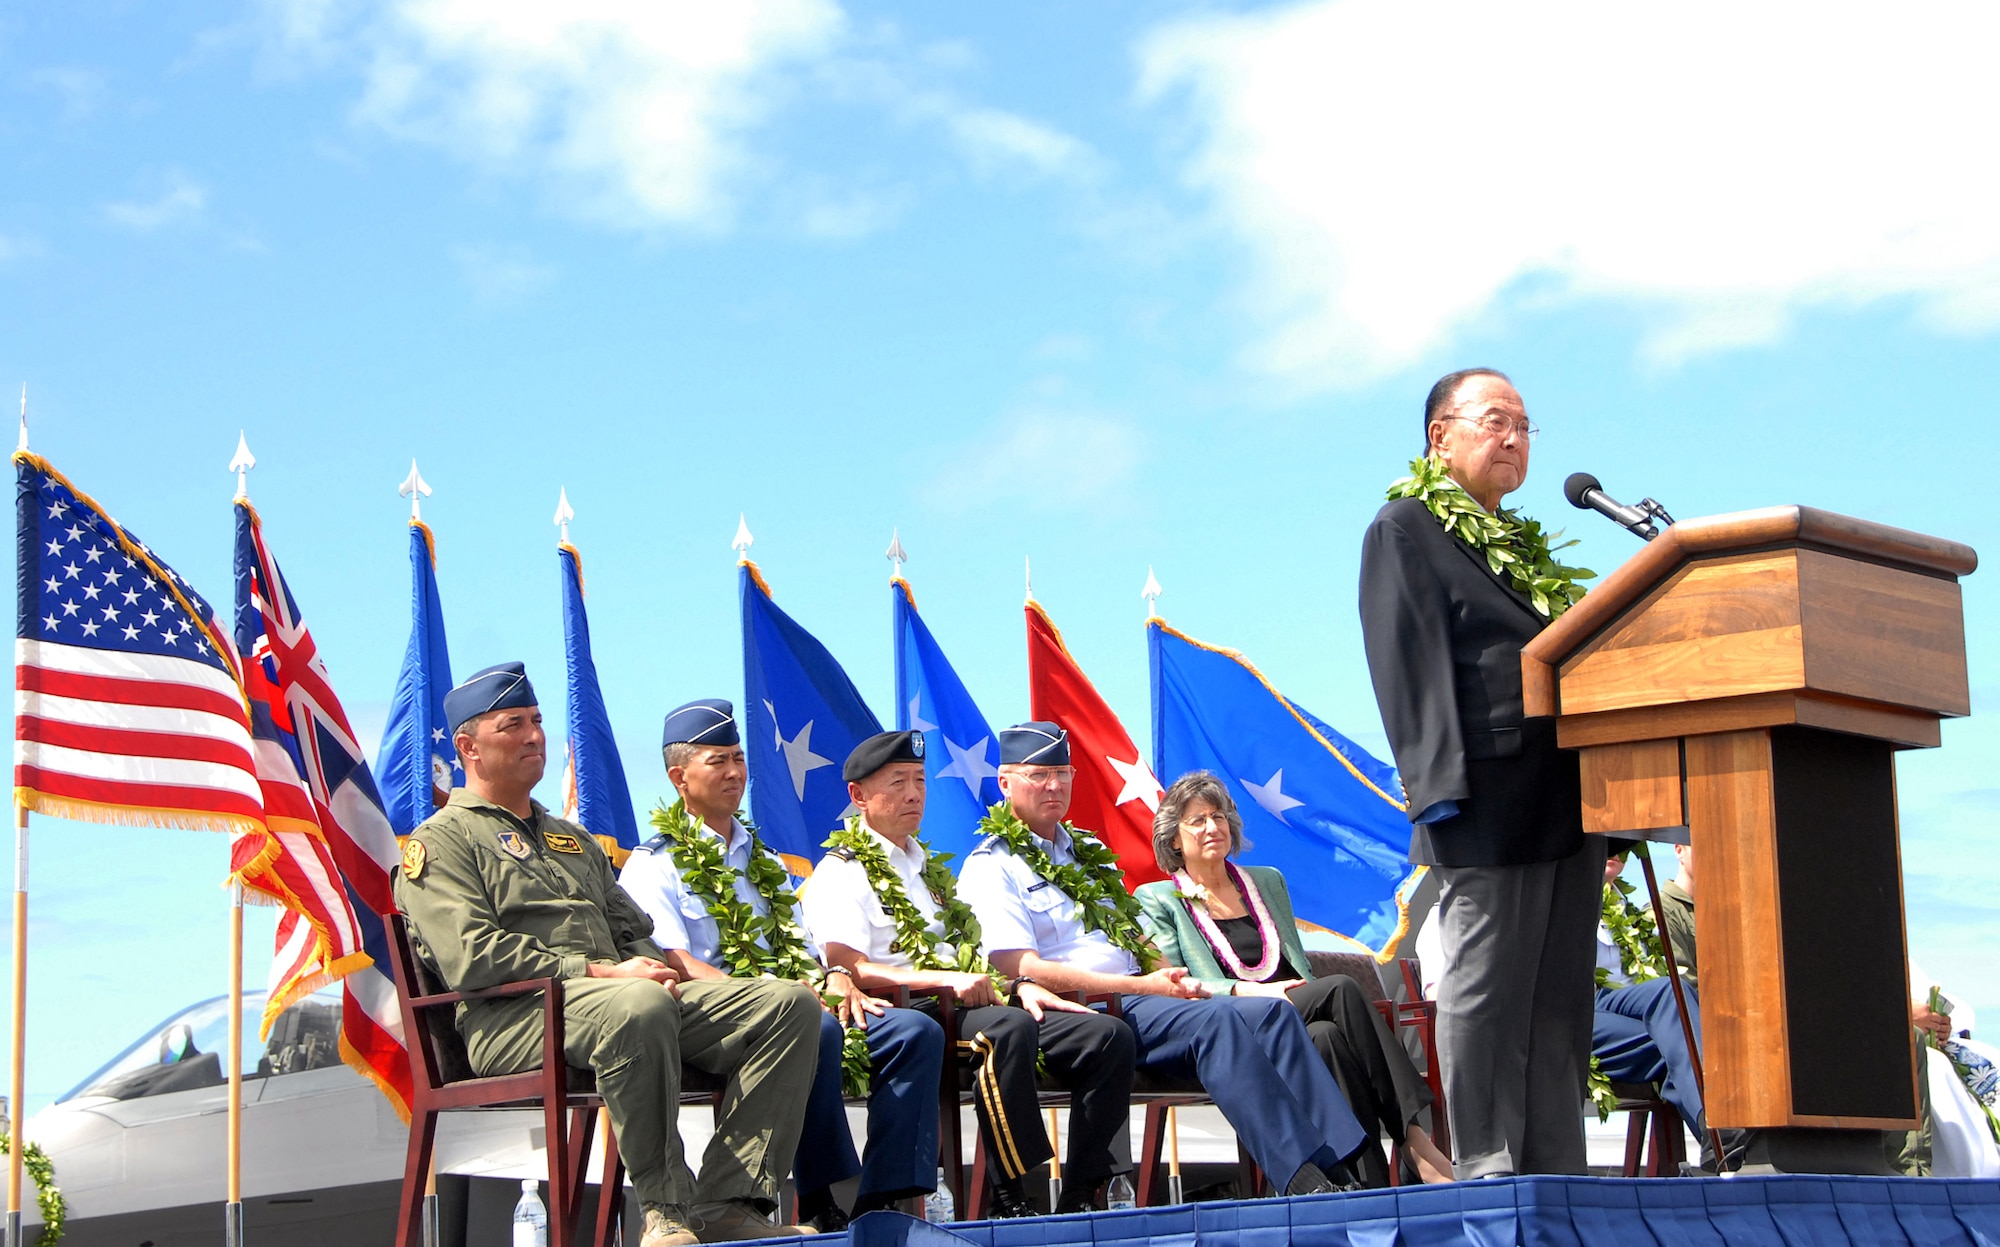 U.S. Senator Daniel K. Inouye speaks at the F-22 Arrival Ceremony July 9, on Joint Base Pearl Harbor-Hickam, Hawaii. Senator Inouye was on hand to help usher in a new era between the Hawaii Air National Guard and Active Duty Air Force. The arrival of the F-22 Raptor marks the beginning of a new associate unit between the 154th Wing, Hawaii Air National Guard, and the 15th Wing, active duty Air Force. This is the first time an F-22 Raptor associate unit will be led by the Guard. (U.S. Air Force photo/Tech. Sgt. Betty J. Squatrito-Martin)